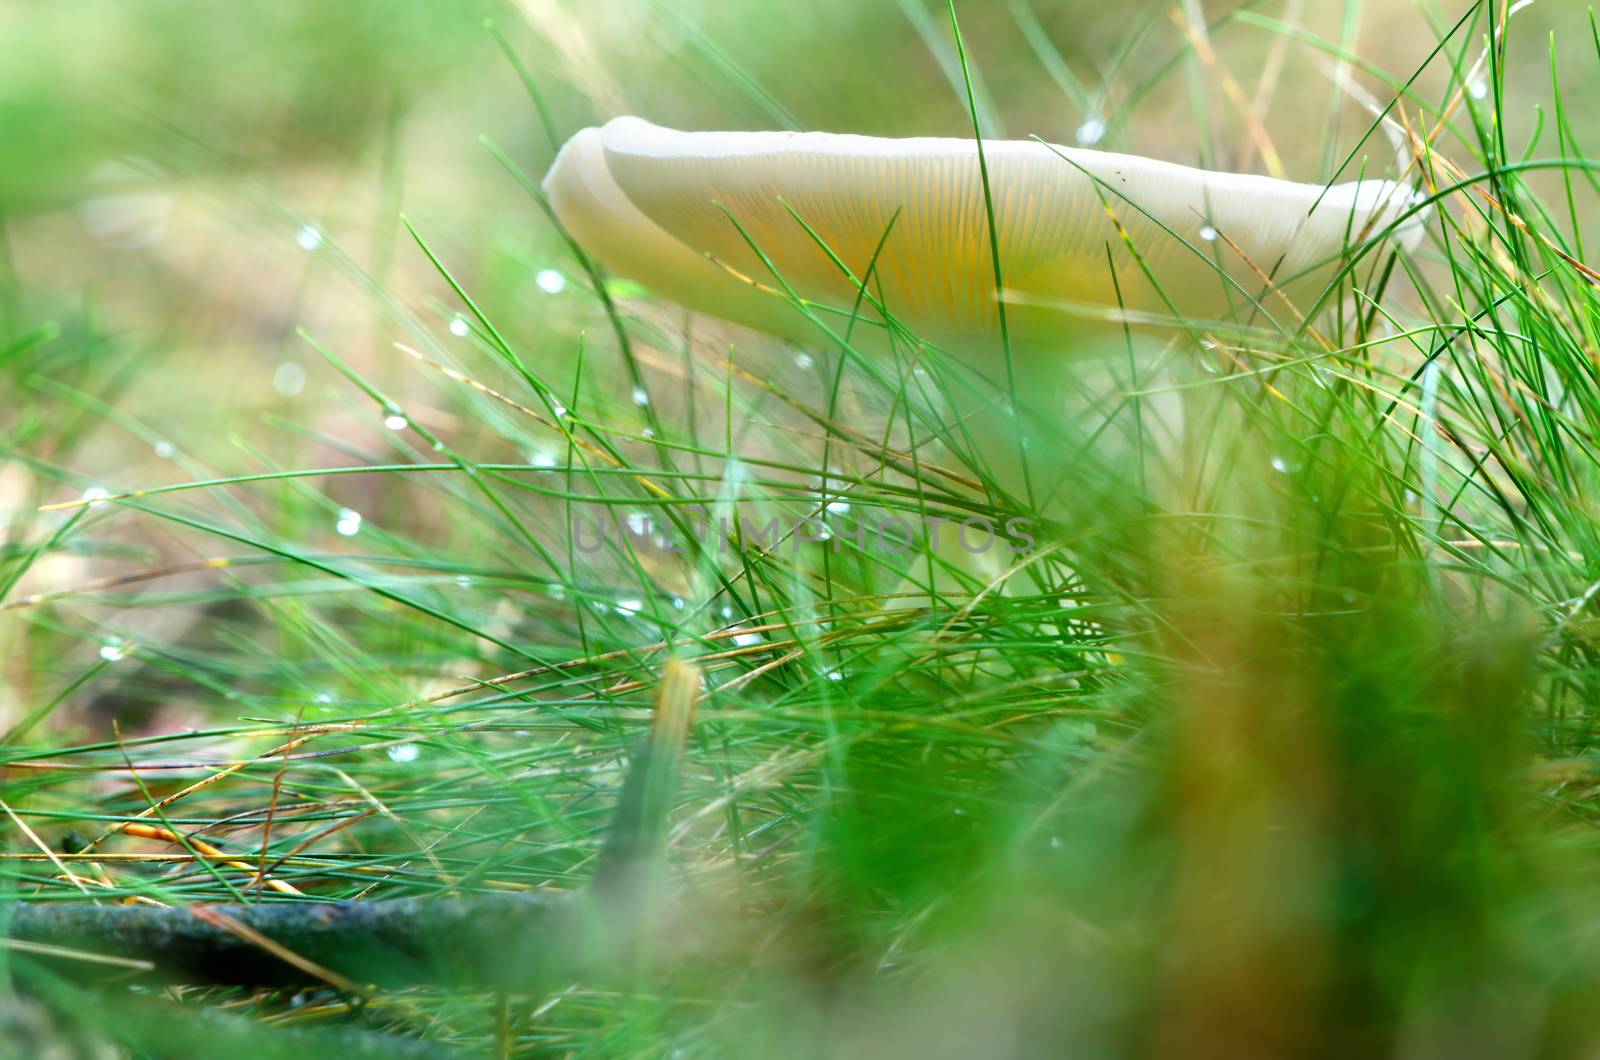 White mushroom among grass, in the morning with dew.